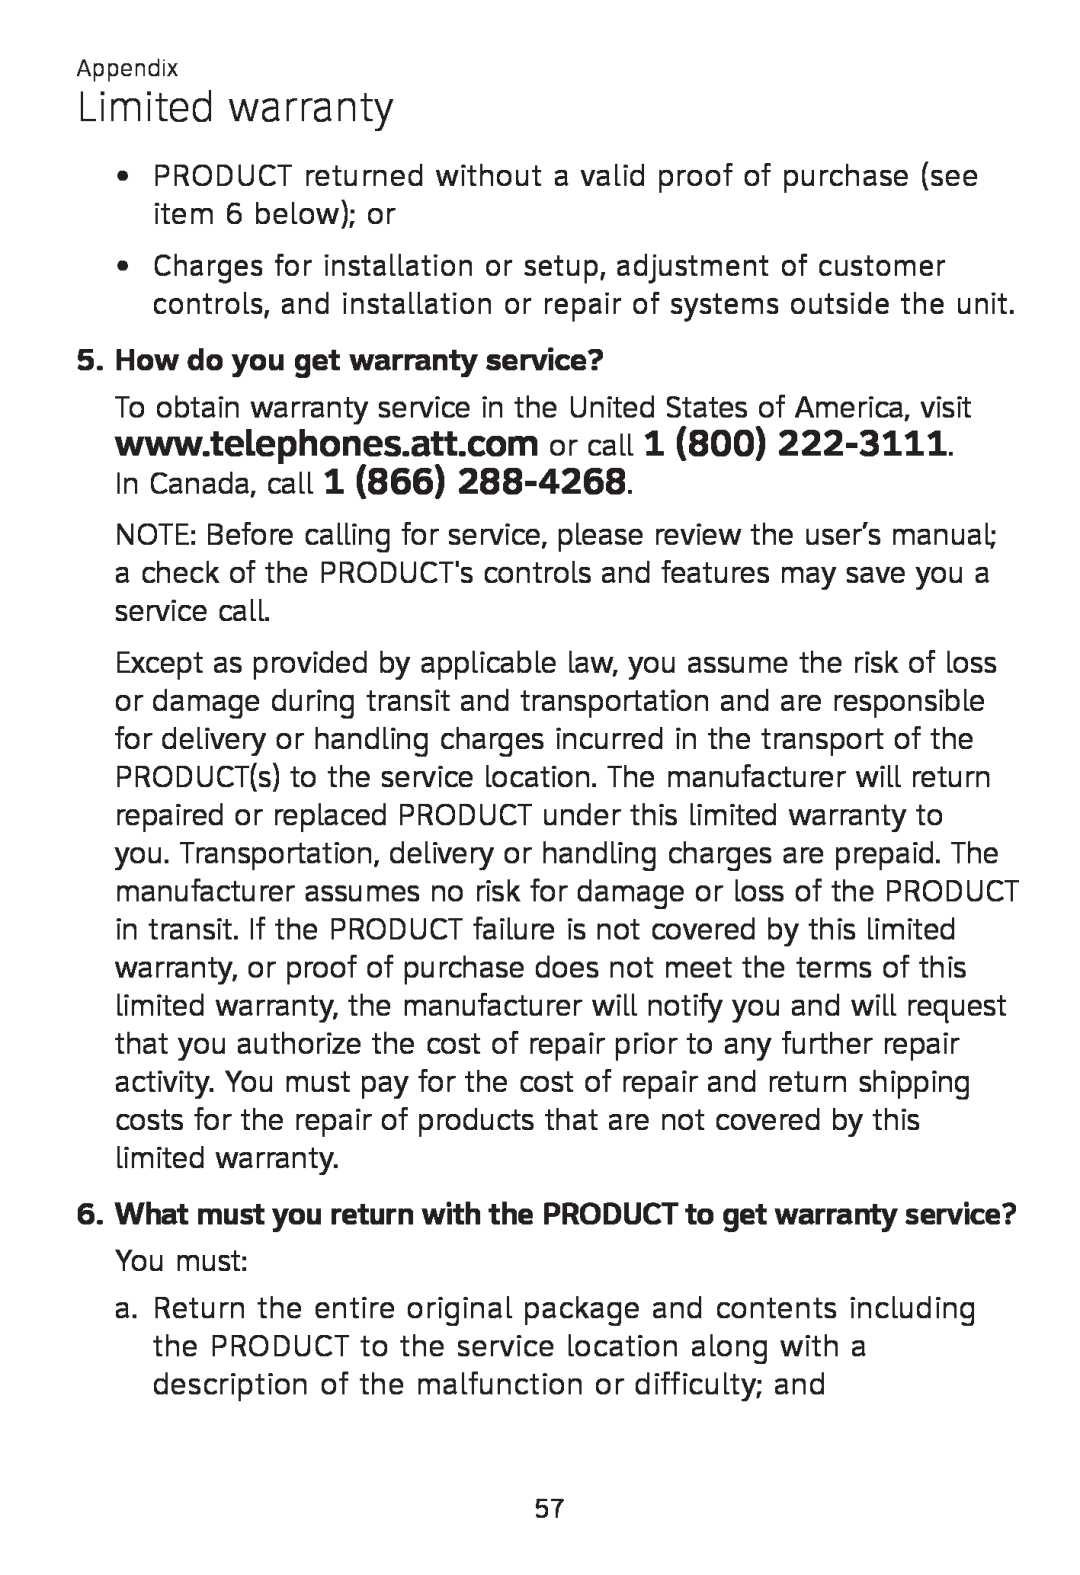 AT&T TL 7610 user manual How do you get warranty service?, Limited warranty 